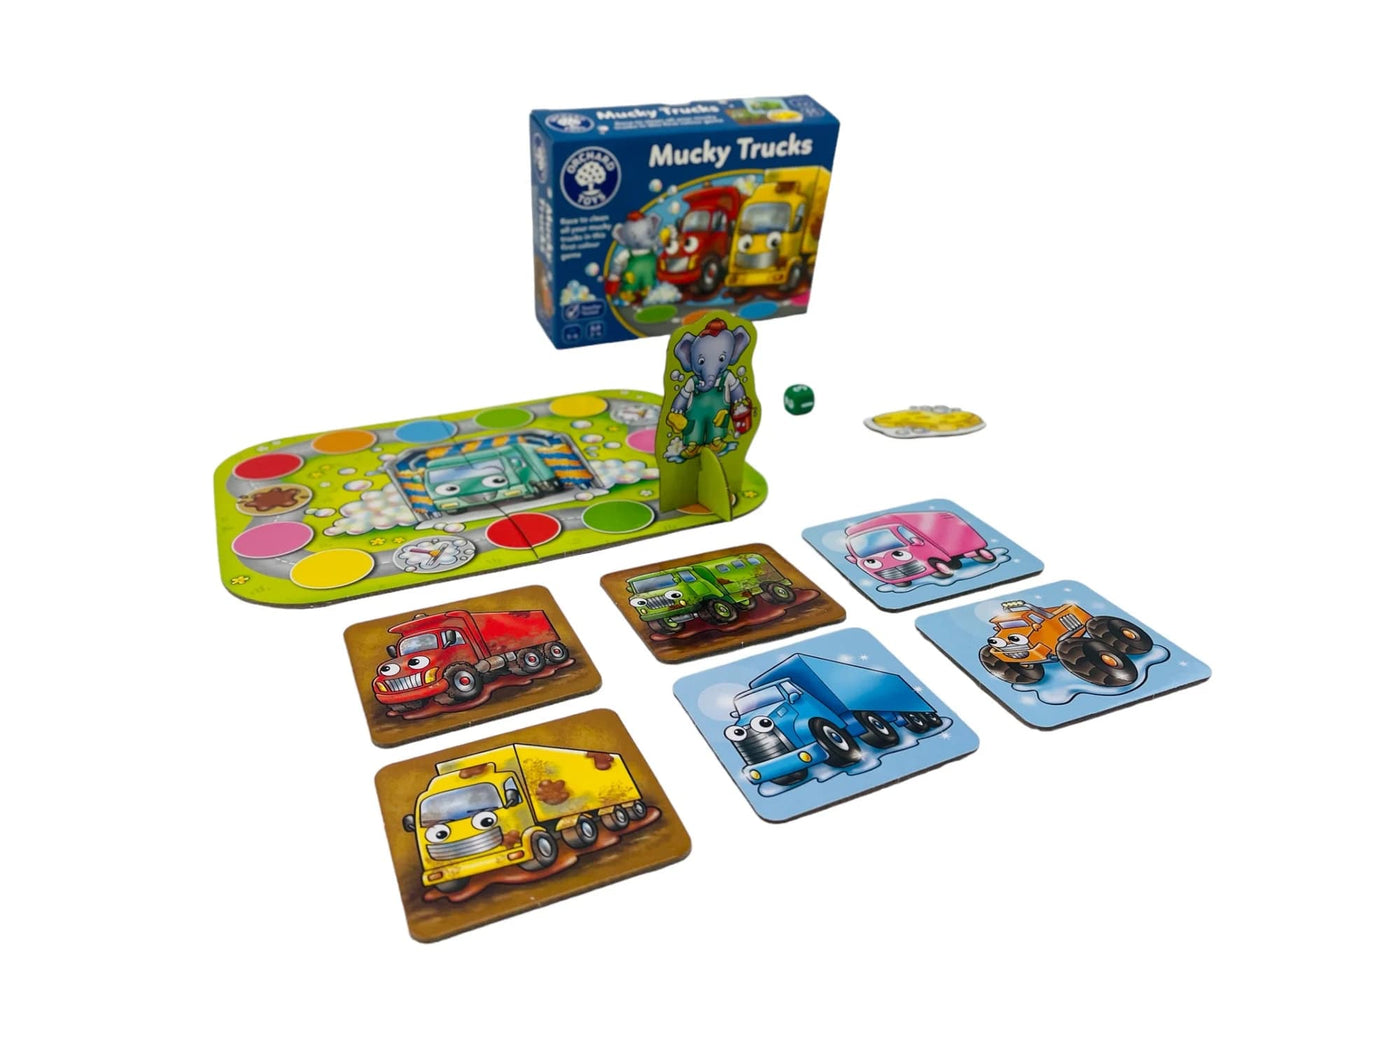 Orchard Toys Game Mucky Trucks